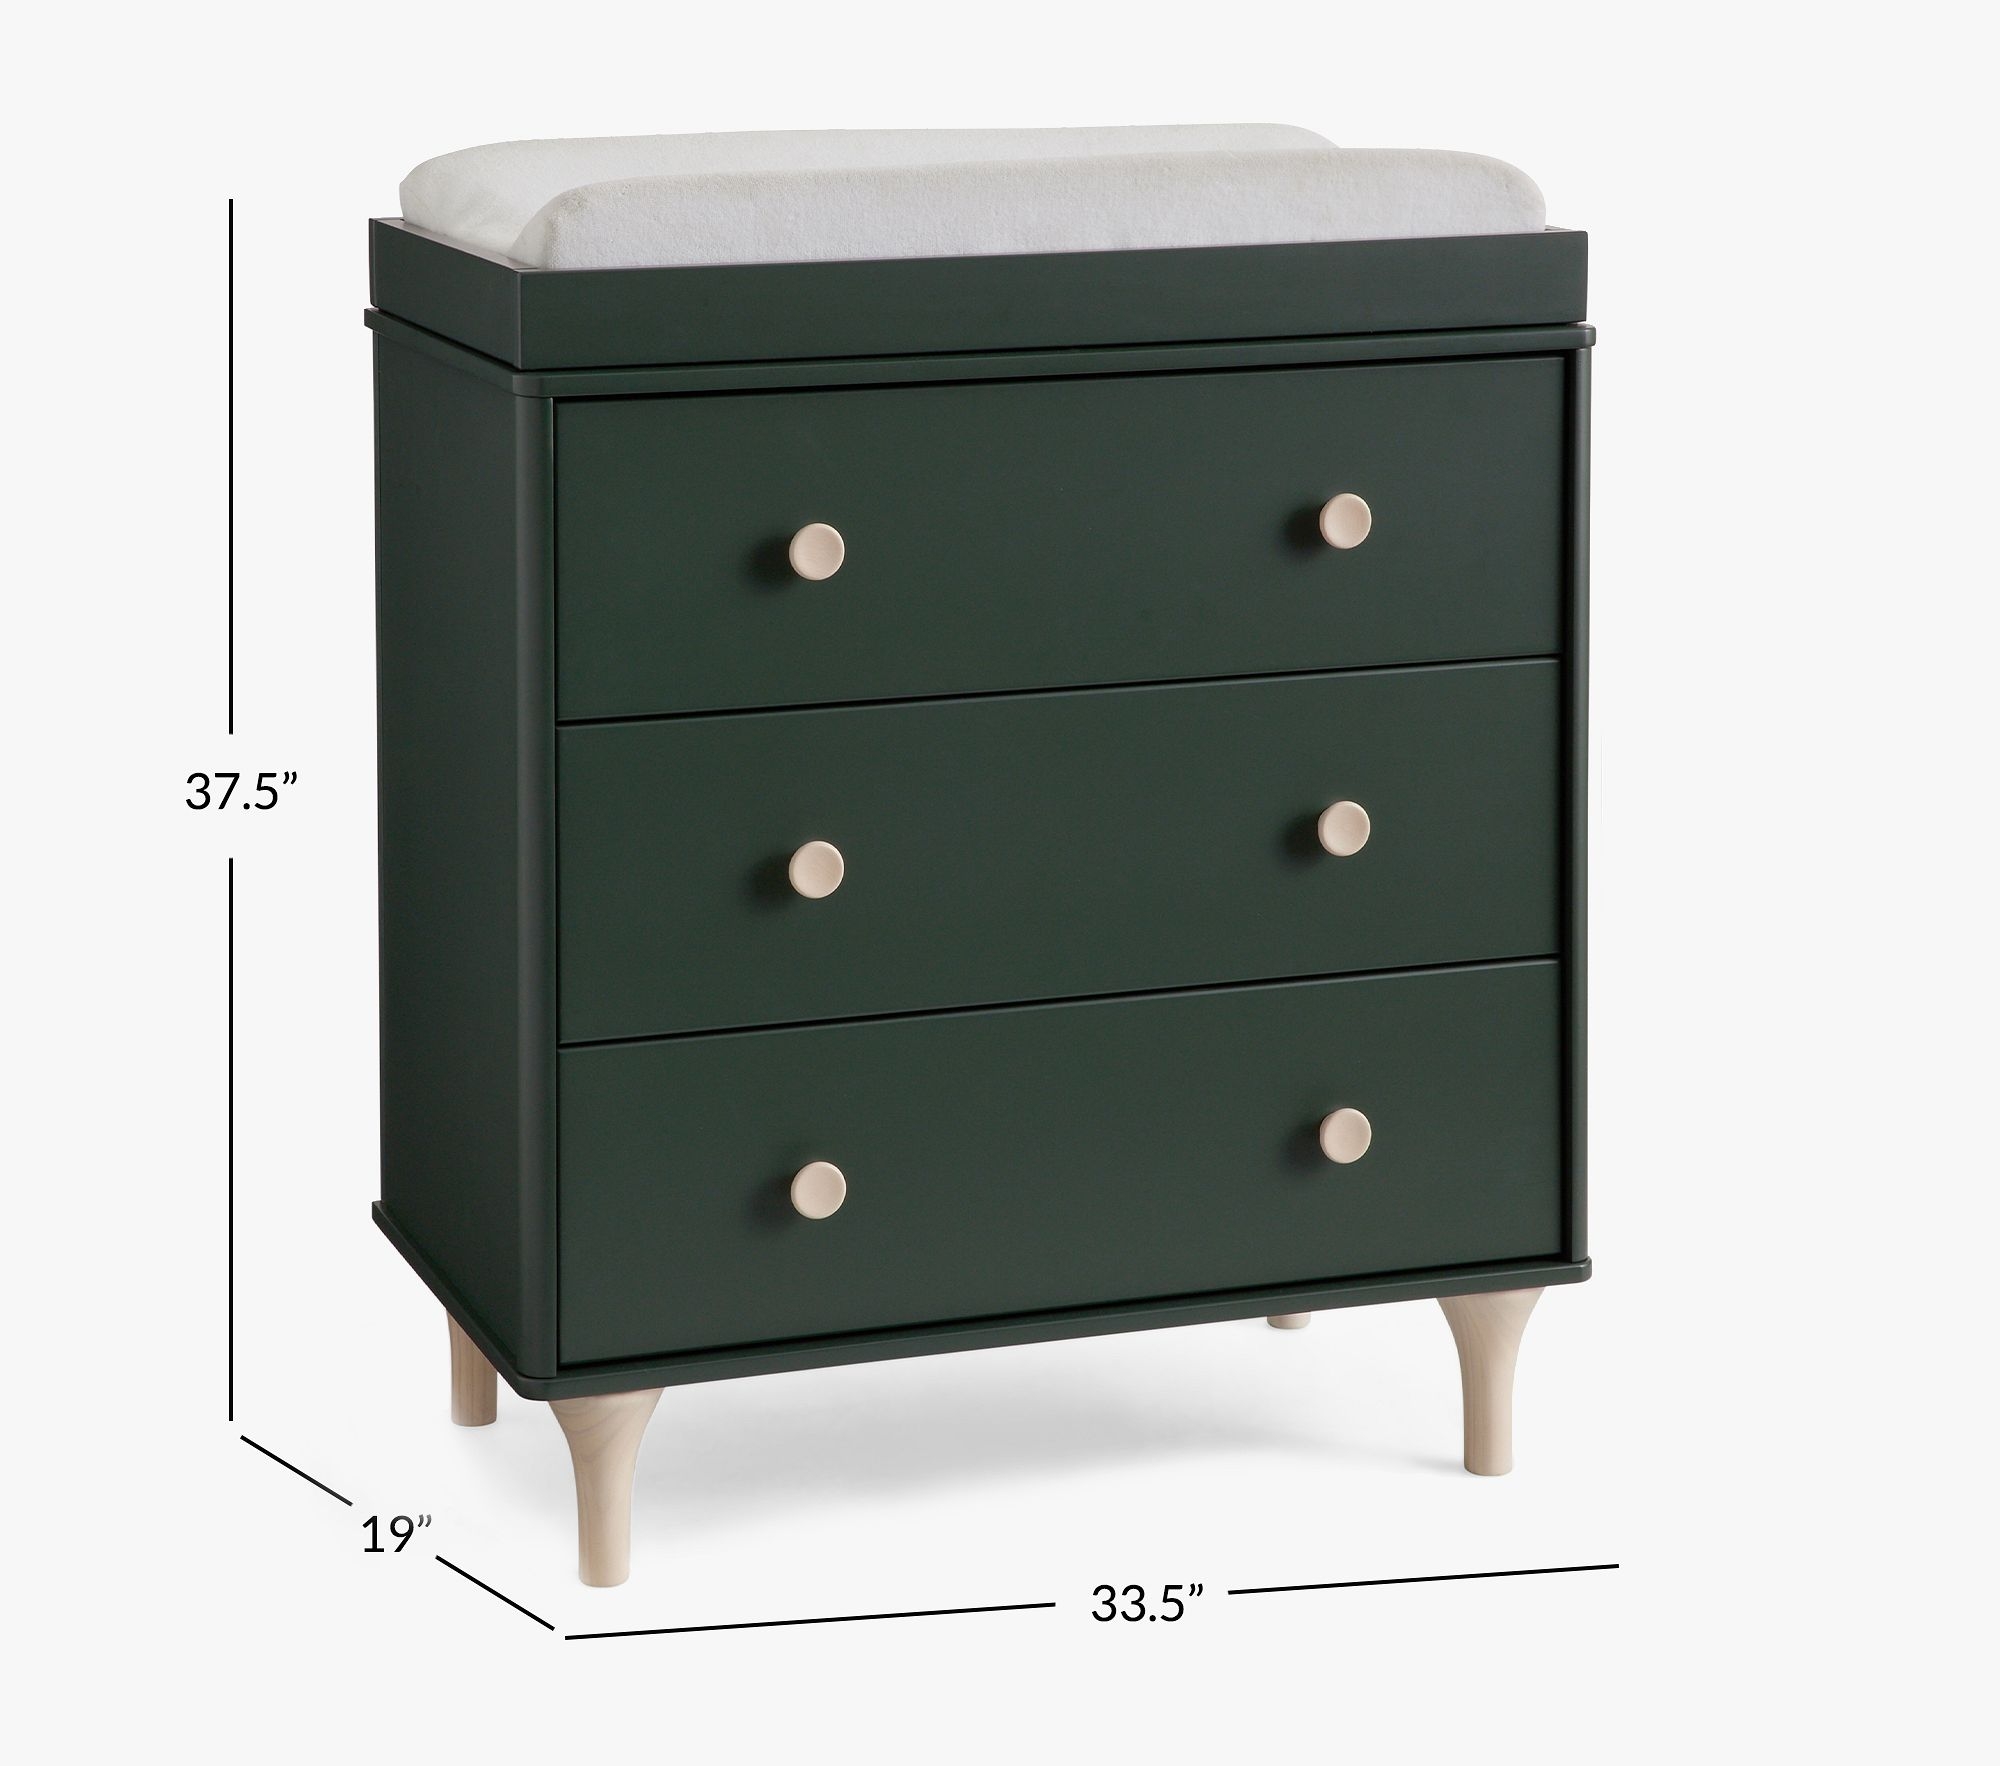 Babyletto Lolly 3-Drawer Changing Dresser, Forest Green/Washed Natural - Image 6